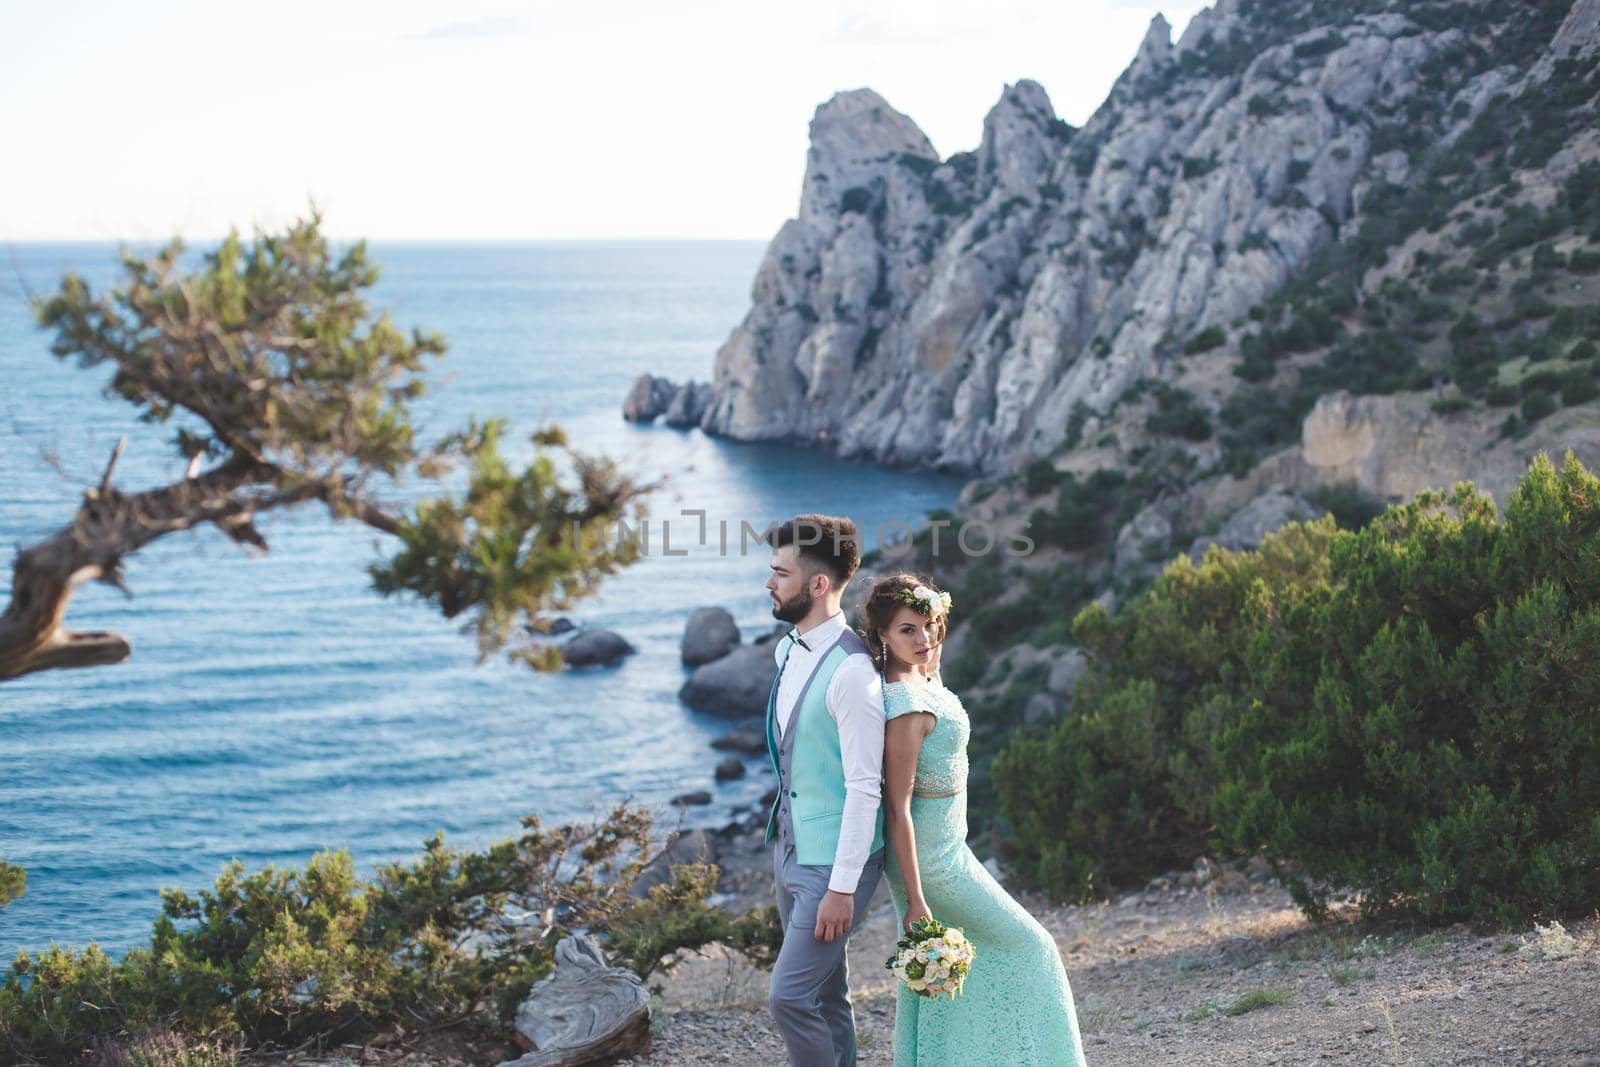 The bride and groom on nature in the mountains near the water. Suit and dress color Tiffany. Back to back.